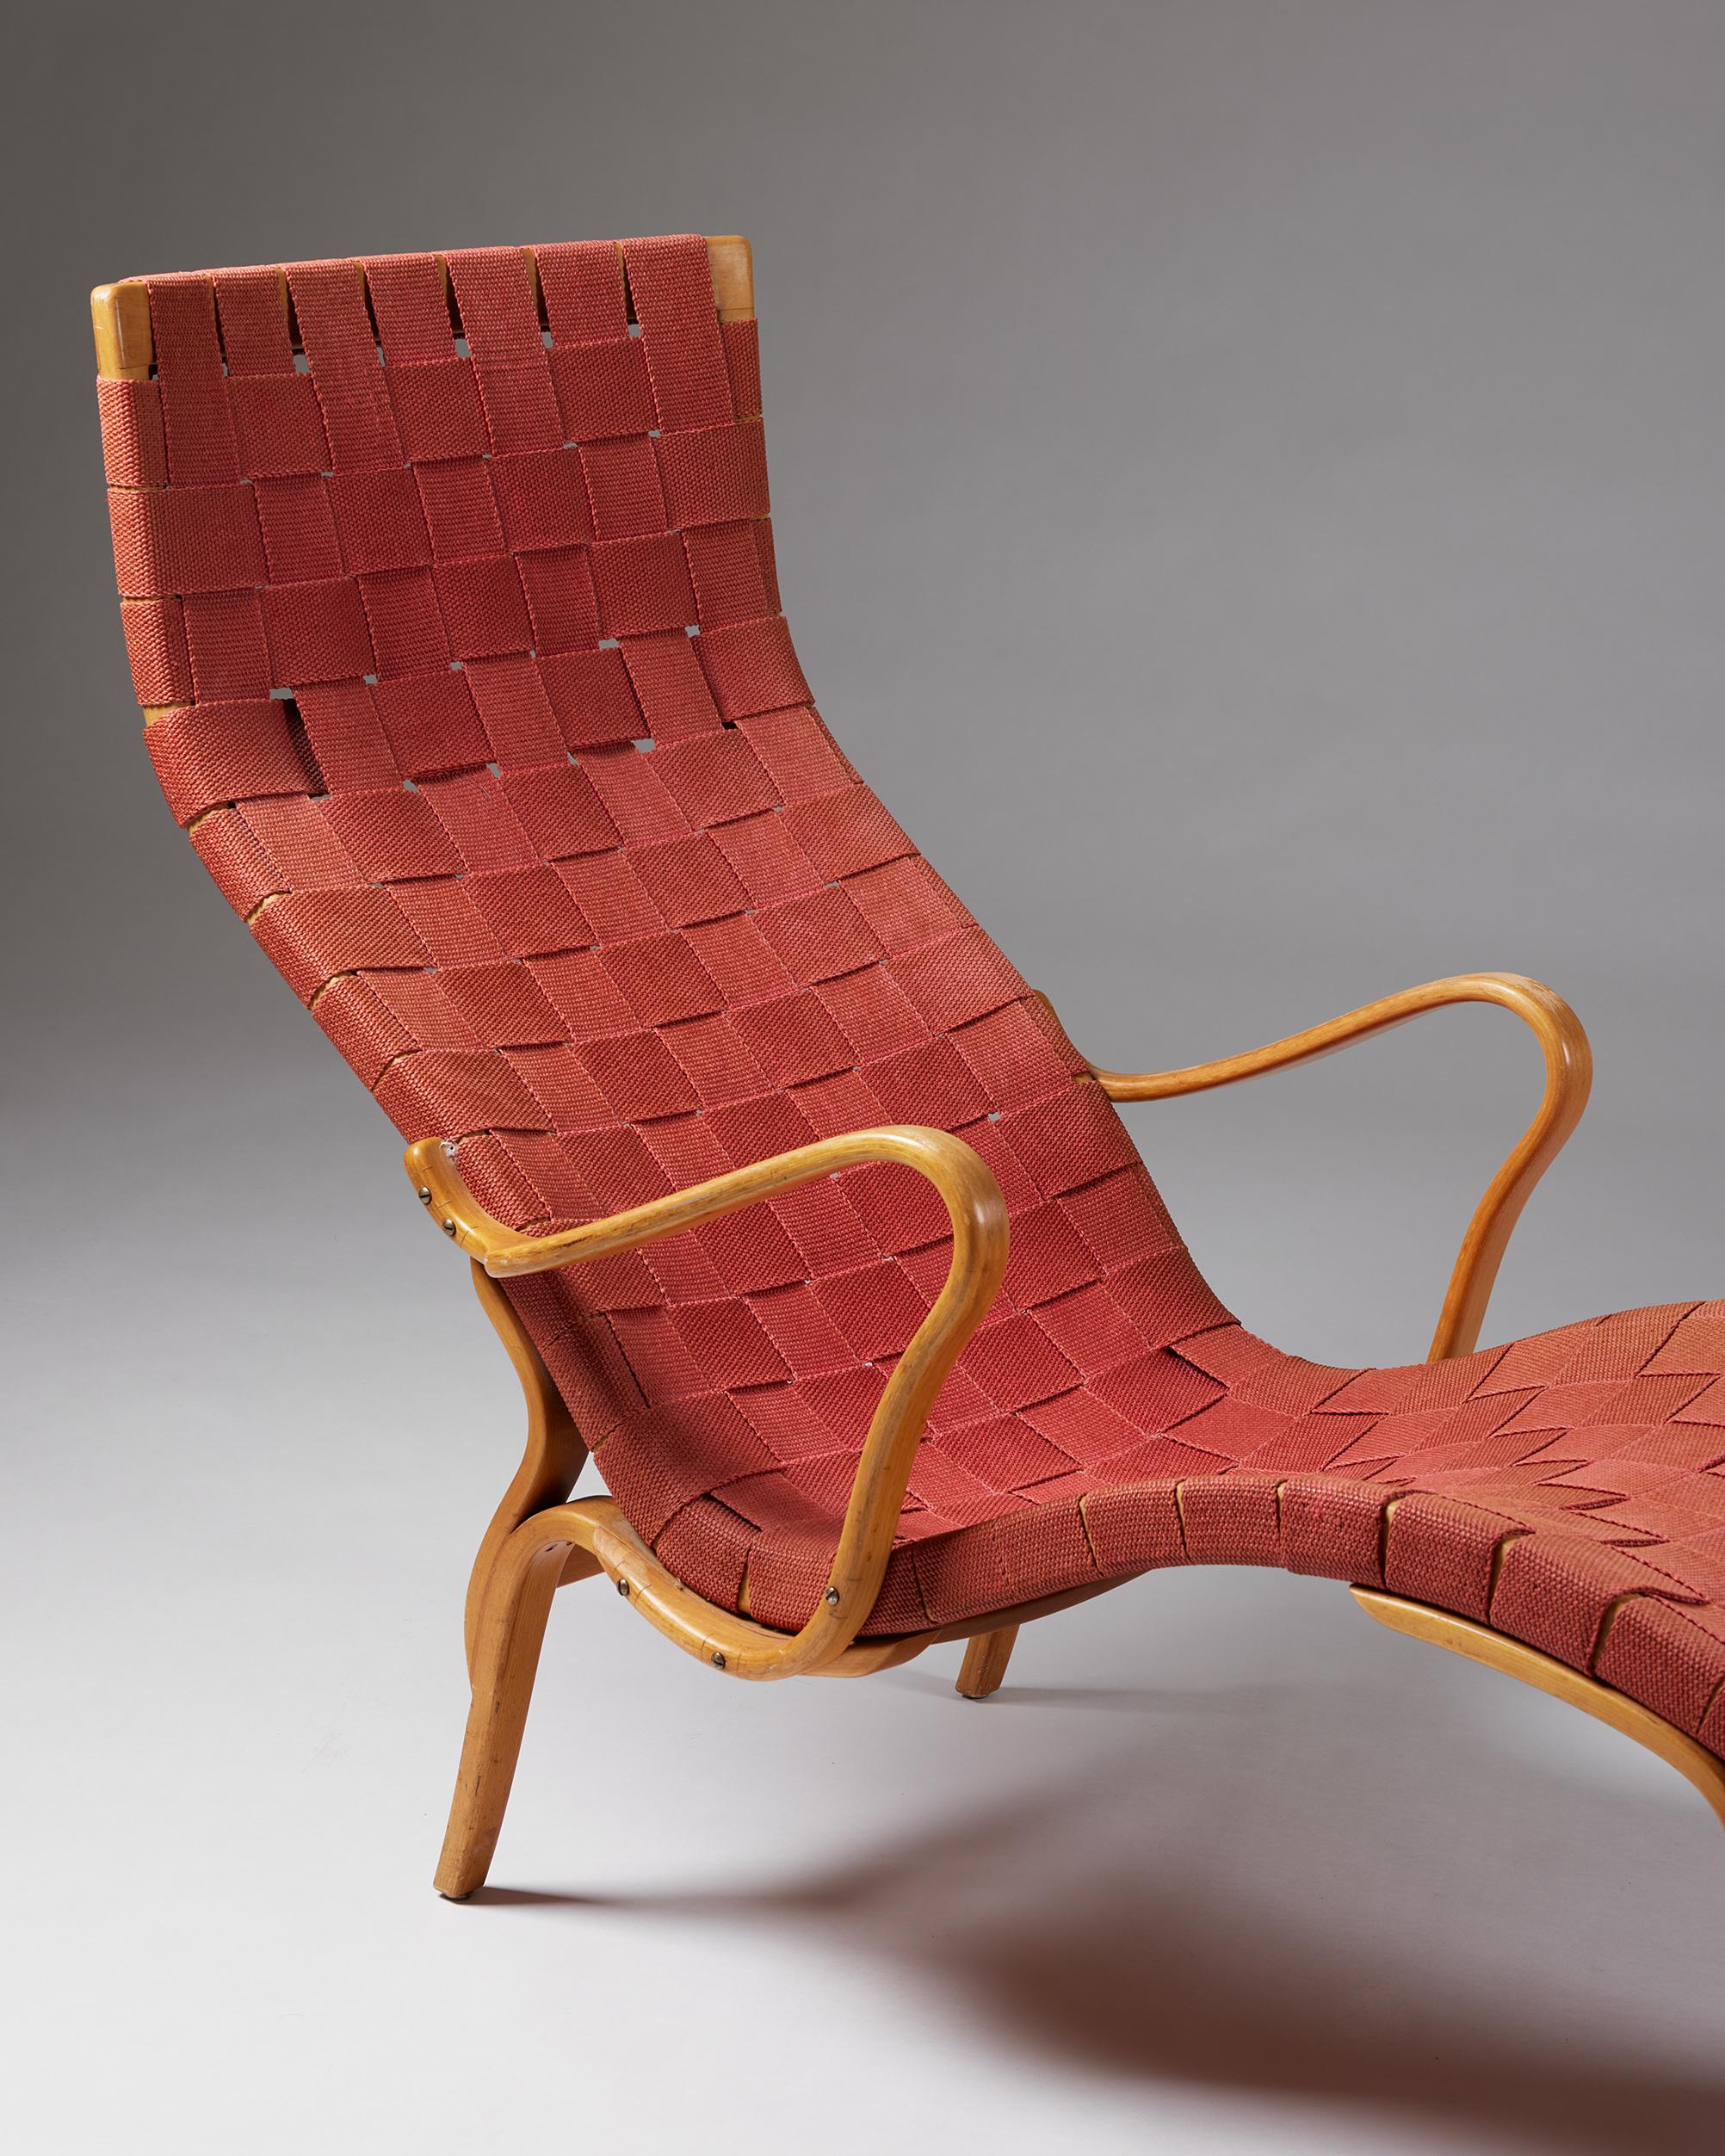 Mid-20th Century Lounge Chair ‘Pernilla 3’ Designed by Bruno Mathsson for Karl Mathsson, Sweden For Sale